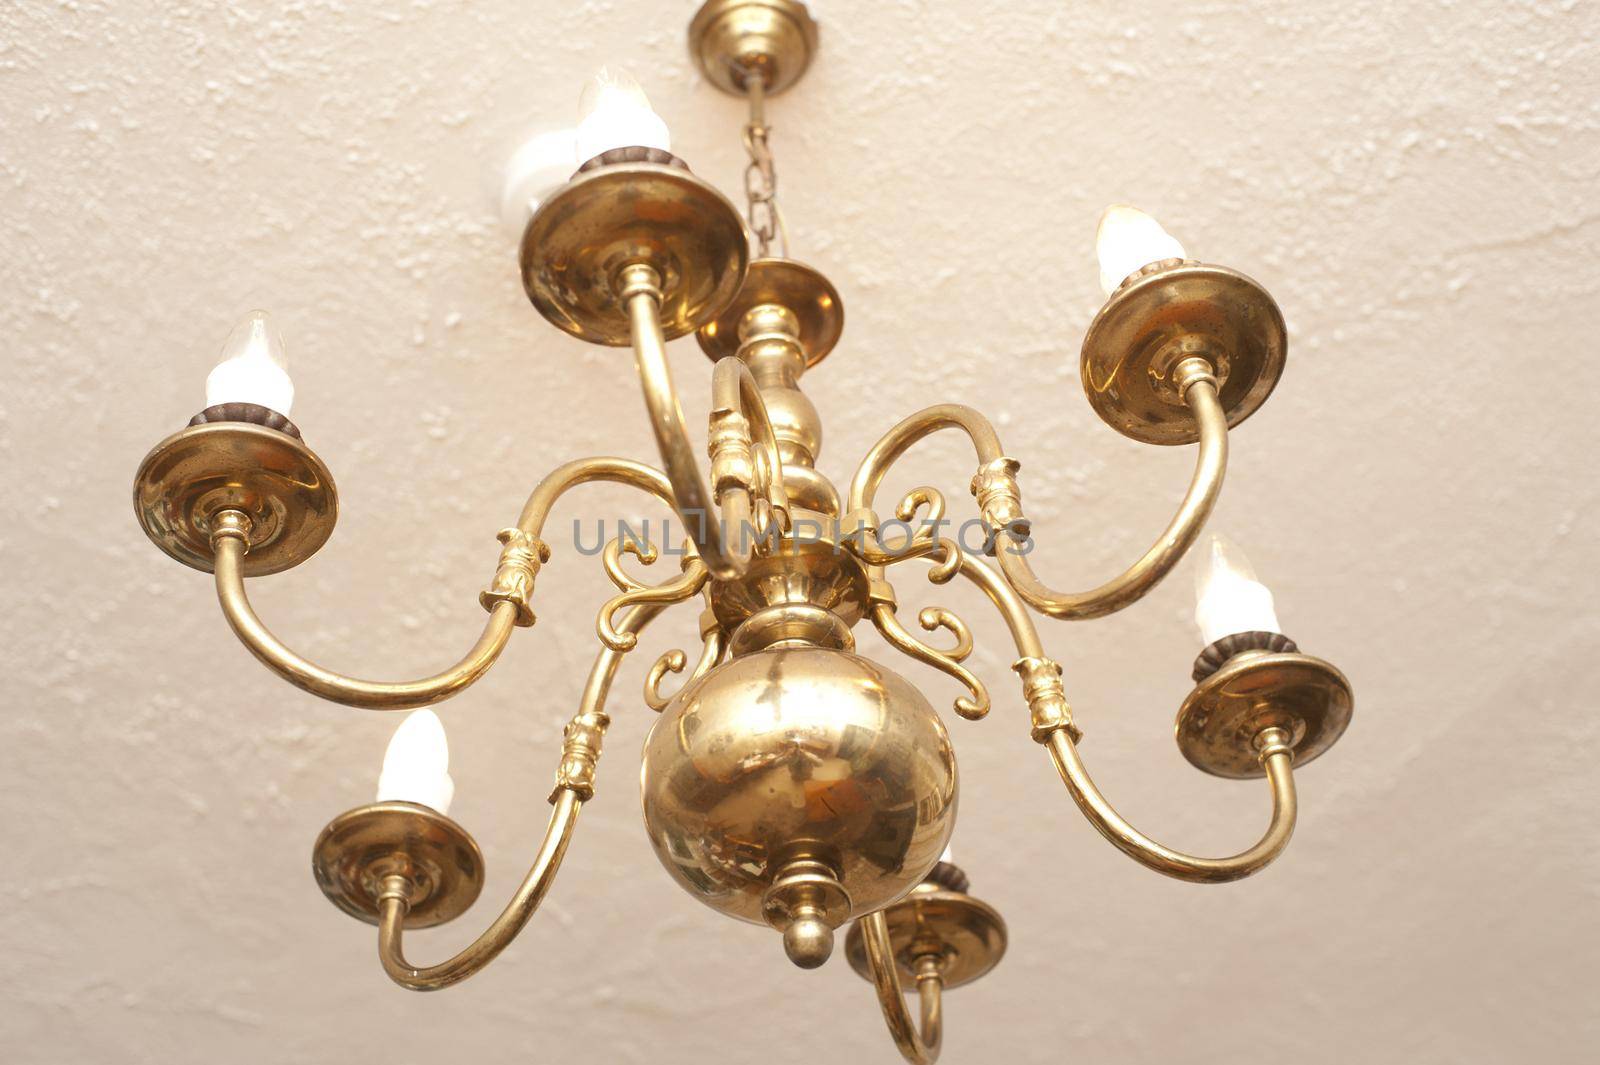 Brass ceiling chandelier with classical candle-style arms viewed from below in an interior decor concept